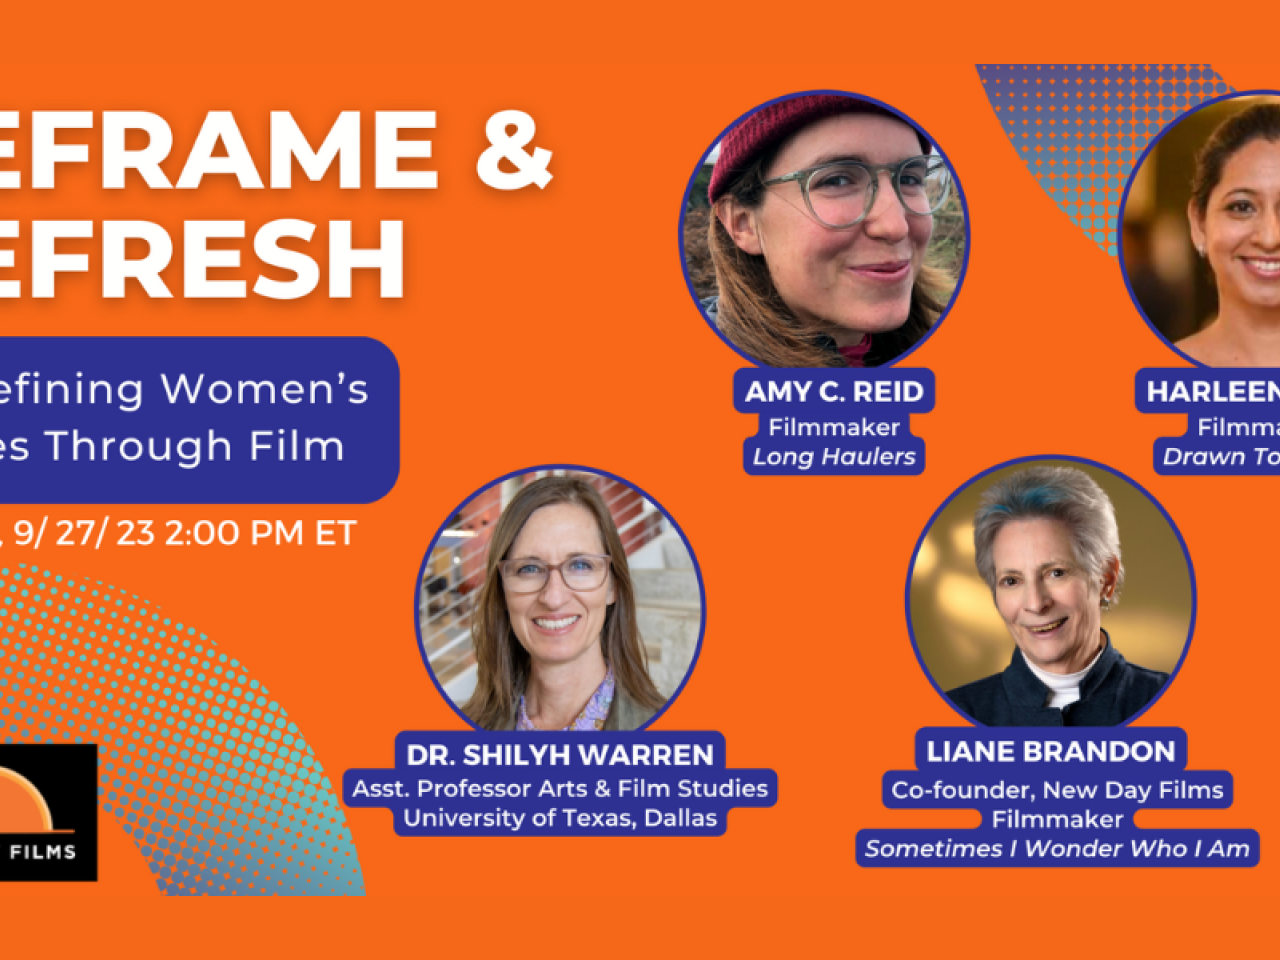 [Image description: Graphic with orange background and purple gradient half circles on corners. New Day Films Logo in lower right corner, text reads Reframe and Refresh Wednesday 9/27/23 2pm ET. Four photos of people in circles Amy C. Reid Filmmaker Long Haulers, Liane Brandon Co-founder New Day Films Filmmaker Sometimes I Wonder Who I Am, Dr. Shilyh Warren Asst. Dean of Graduate Studies Asst. Professor Arts & Film Studies University of Texas Dallas, Harleen Singh Filmmaker Drawn Together.]